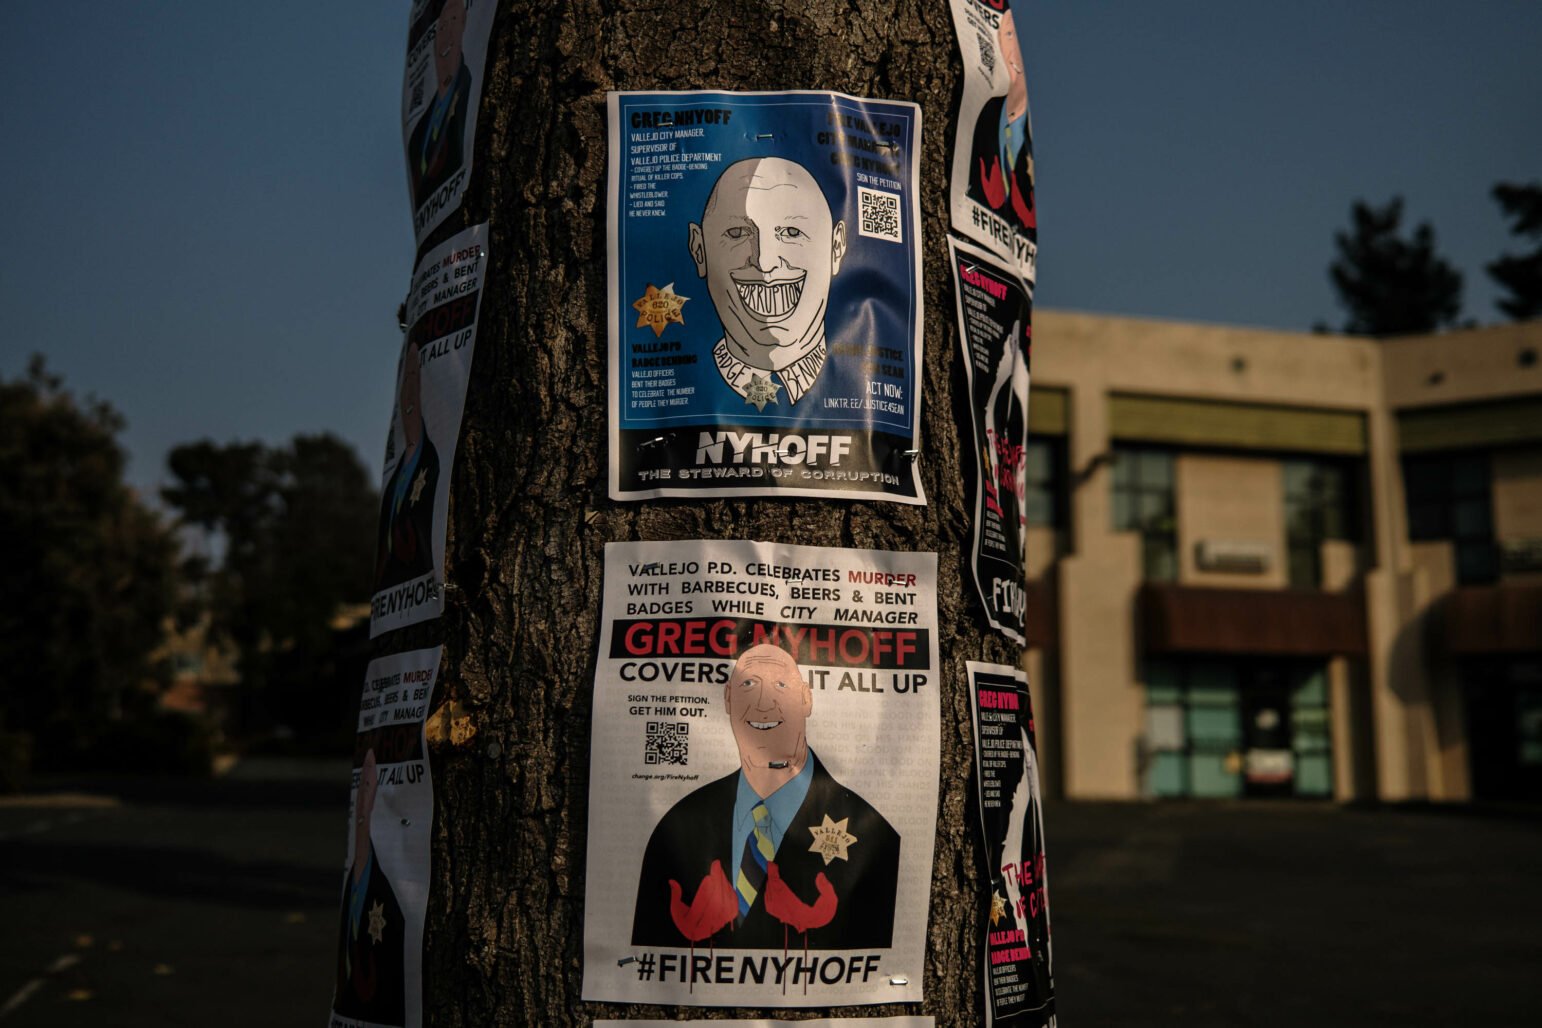 A tree covered in posters criticizing Greg Nyhoff, the former Vallejo City Manager, is shown. The posters depict Nyhoff with captions accusing him of covering up police misconduct and corruption. The background includes a building and a parking lot, indicating a public area.